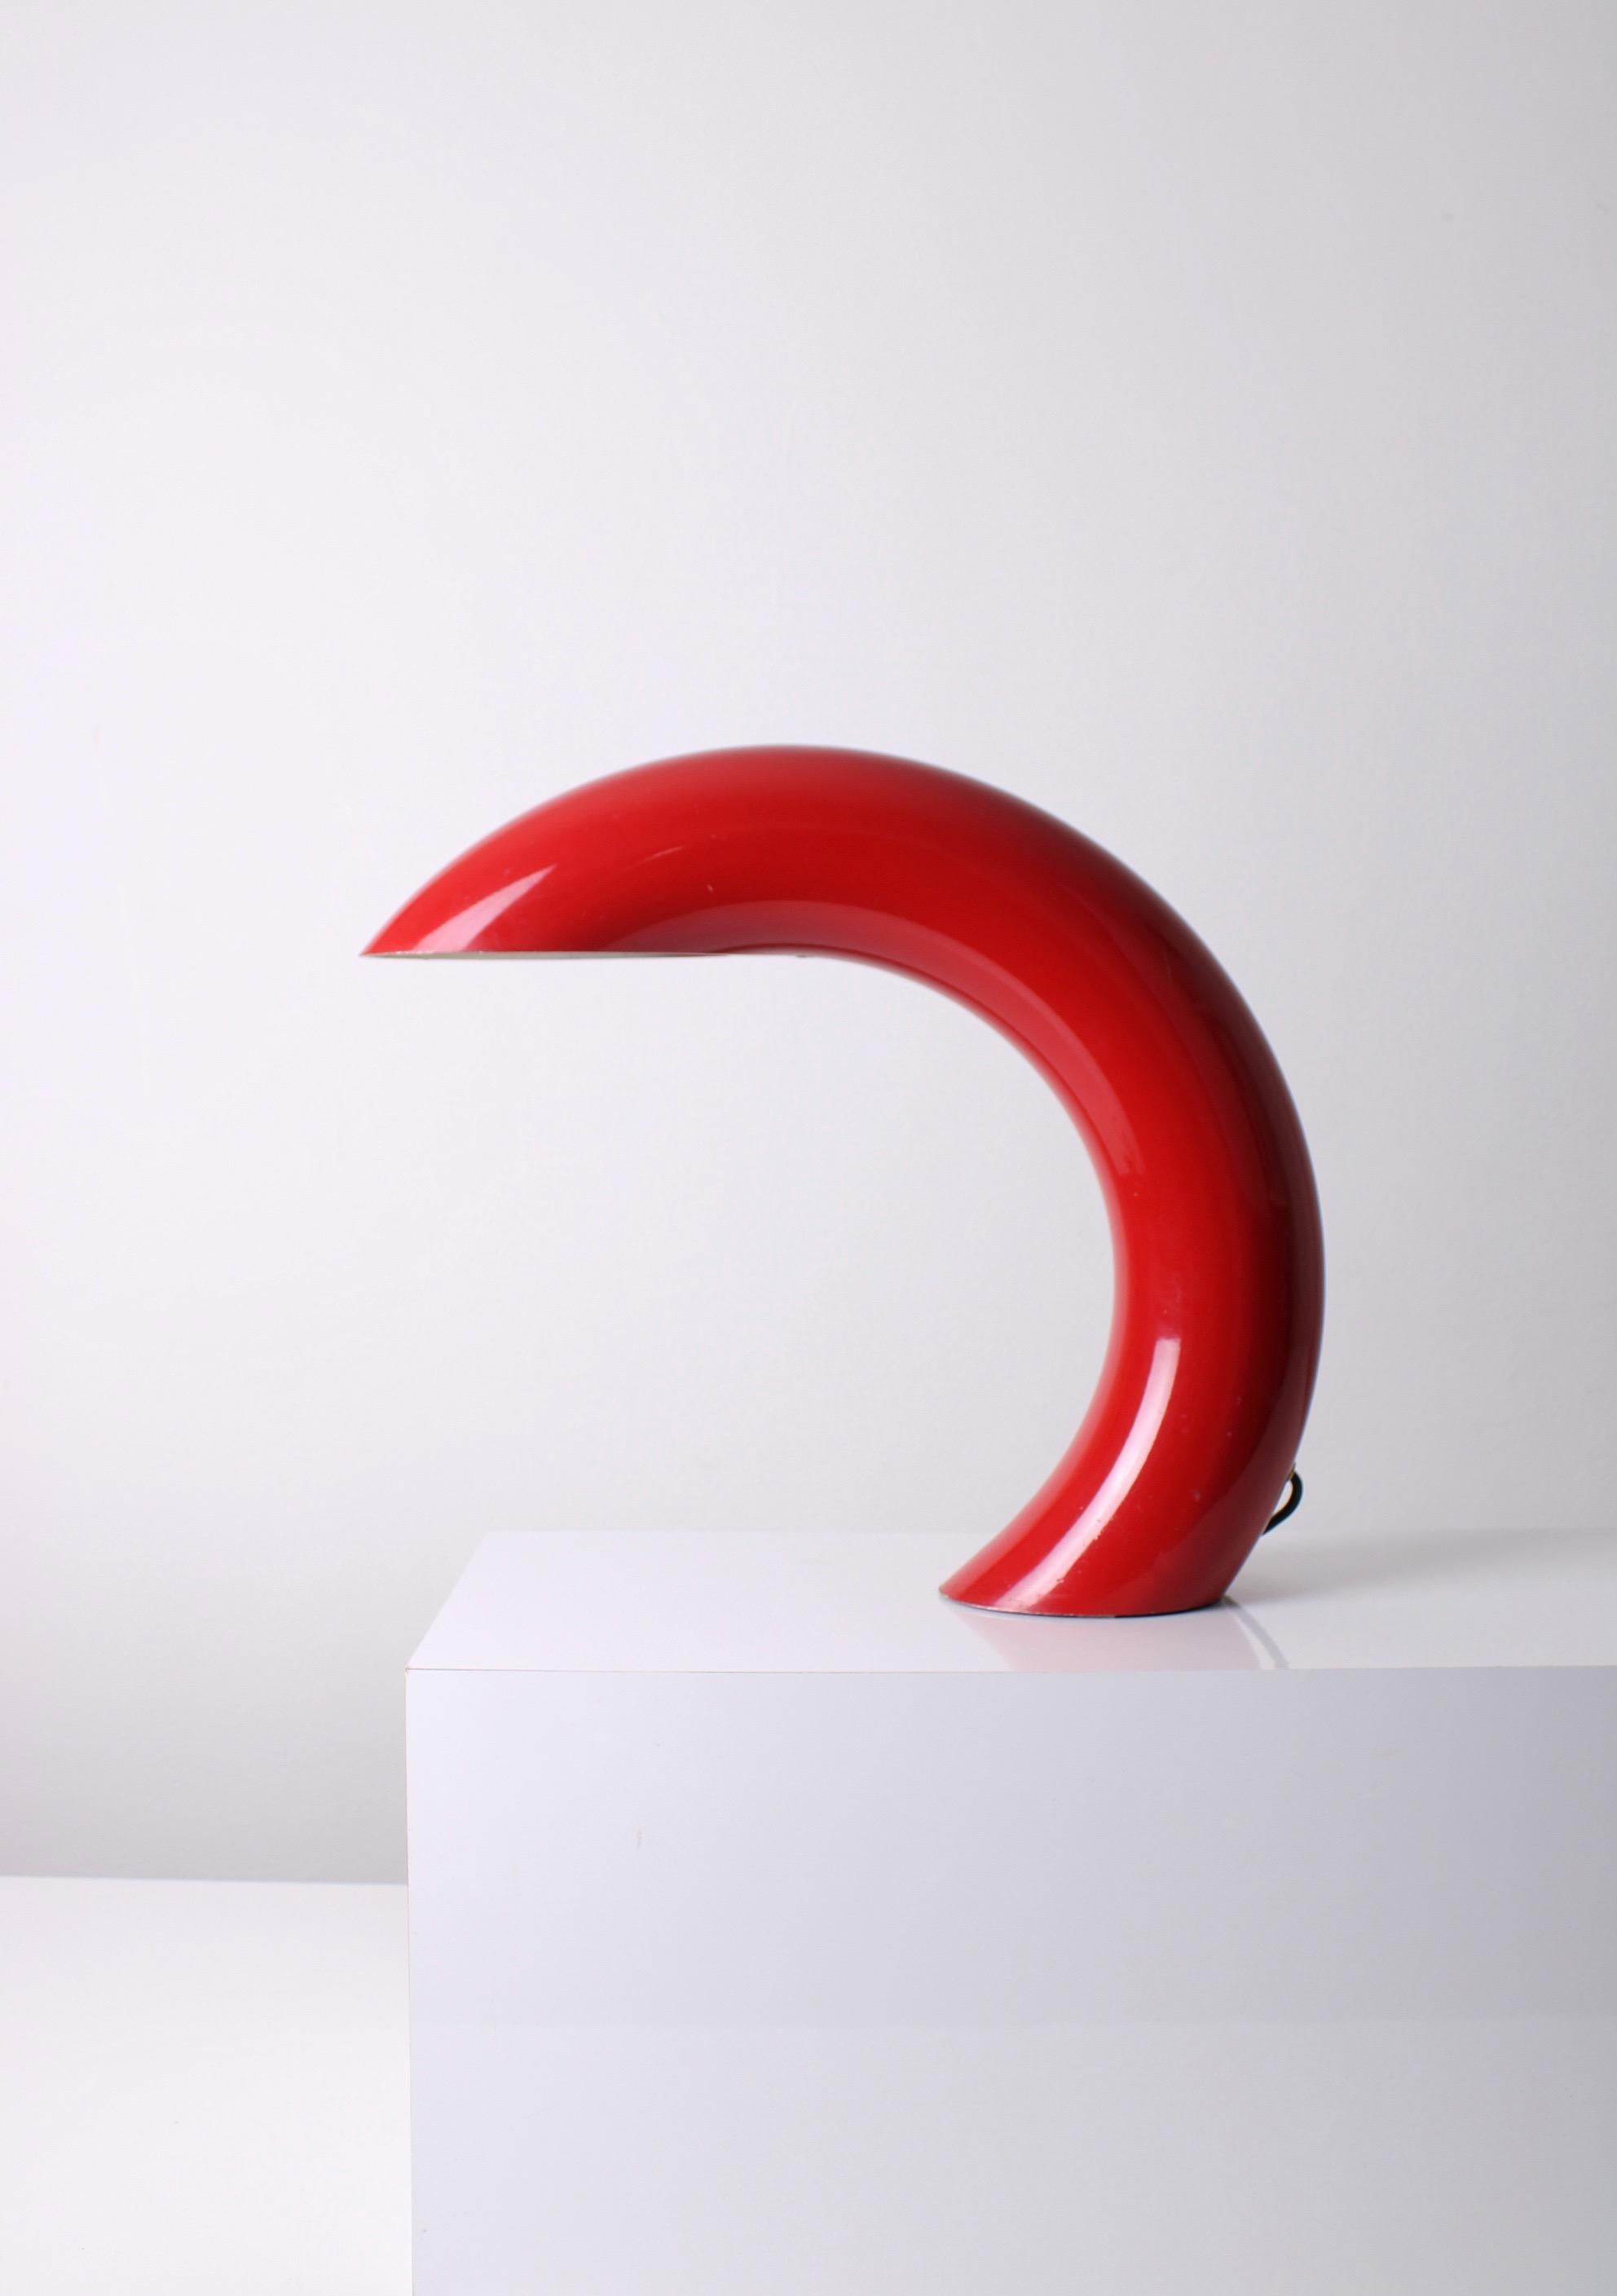 This sculptural table lamp was designed and made by a little-known Italian company named Alfredo Bianchi. This geometrically shaped design consists of a single circular tube made of cast aluminum and finished with a red high-gloss lacquer. It was